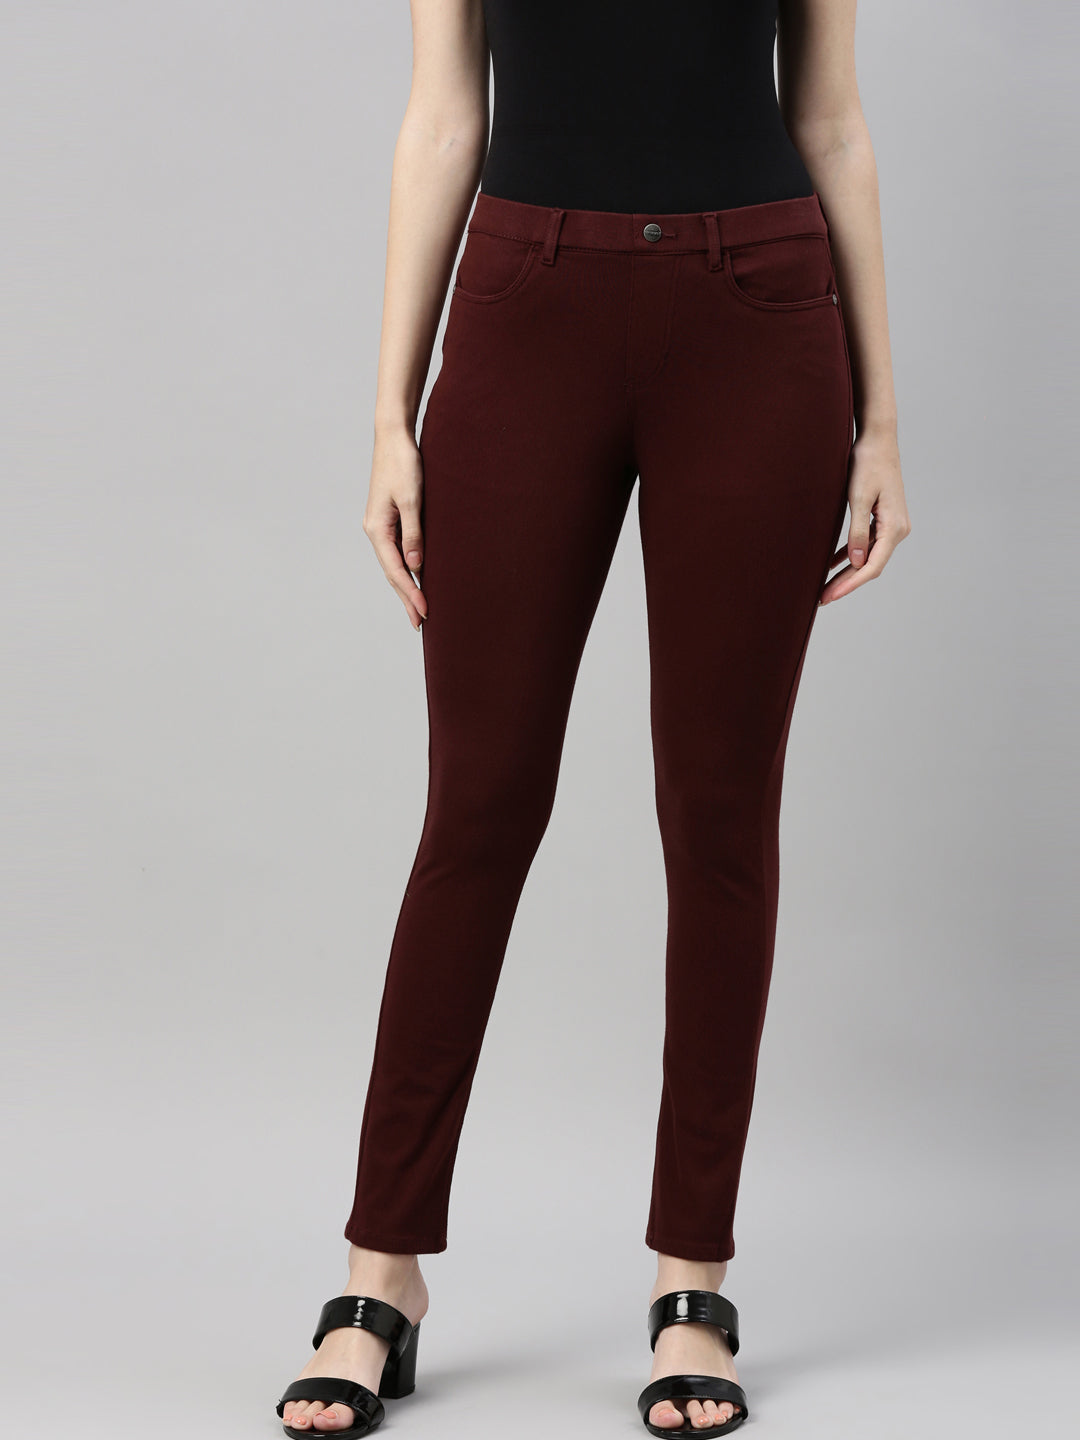  Go Colors Jeggings